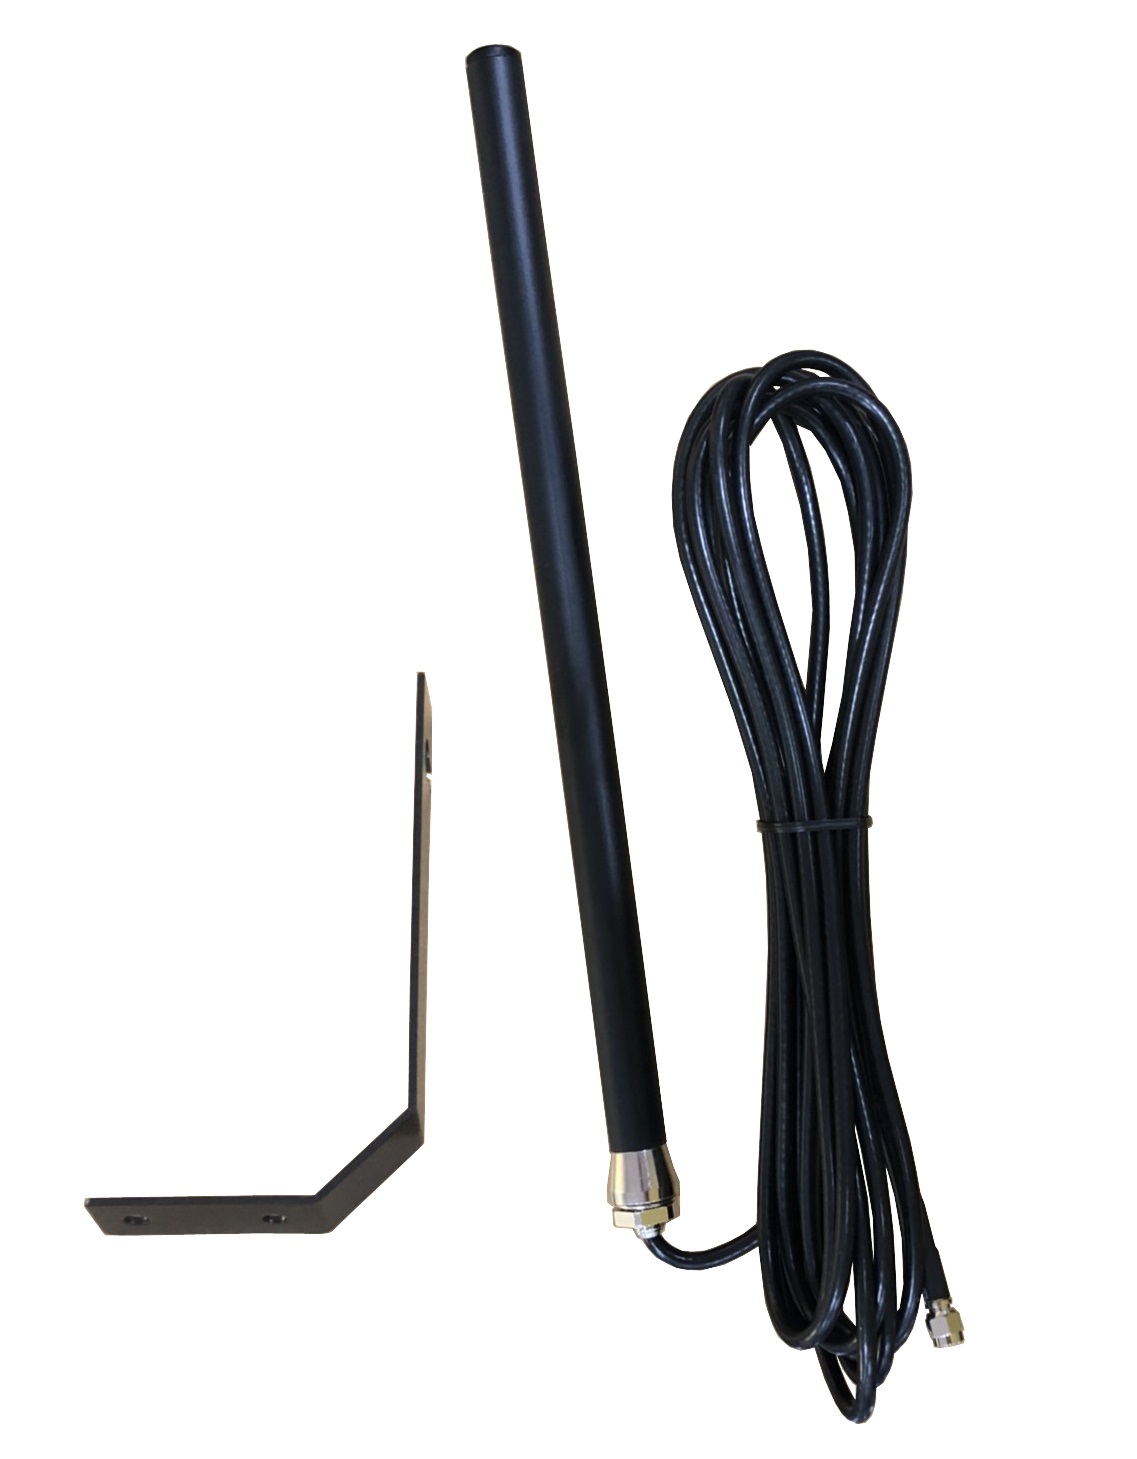 Truck / Trailer / Heavy Duty OMNI Antenna for Body Parts System made by Chinmore Industry Co., LTD.　竣茂工業有限公司 - MatchSupplier.com